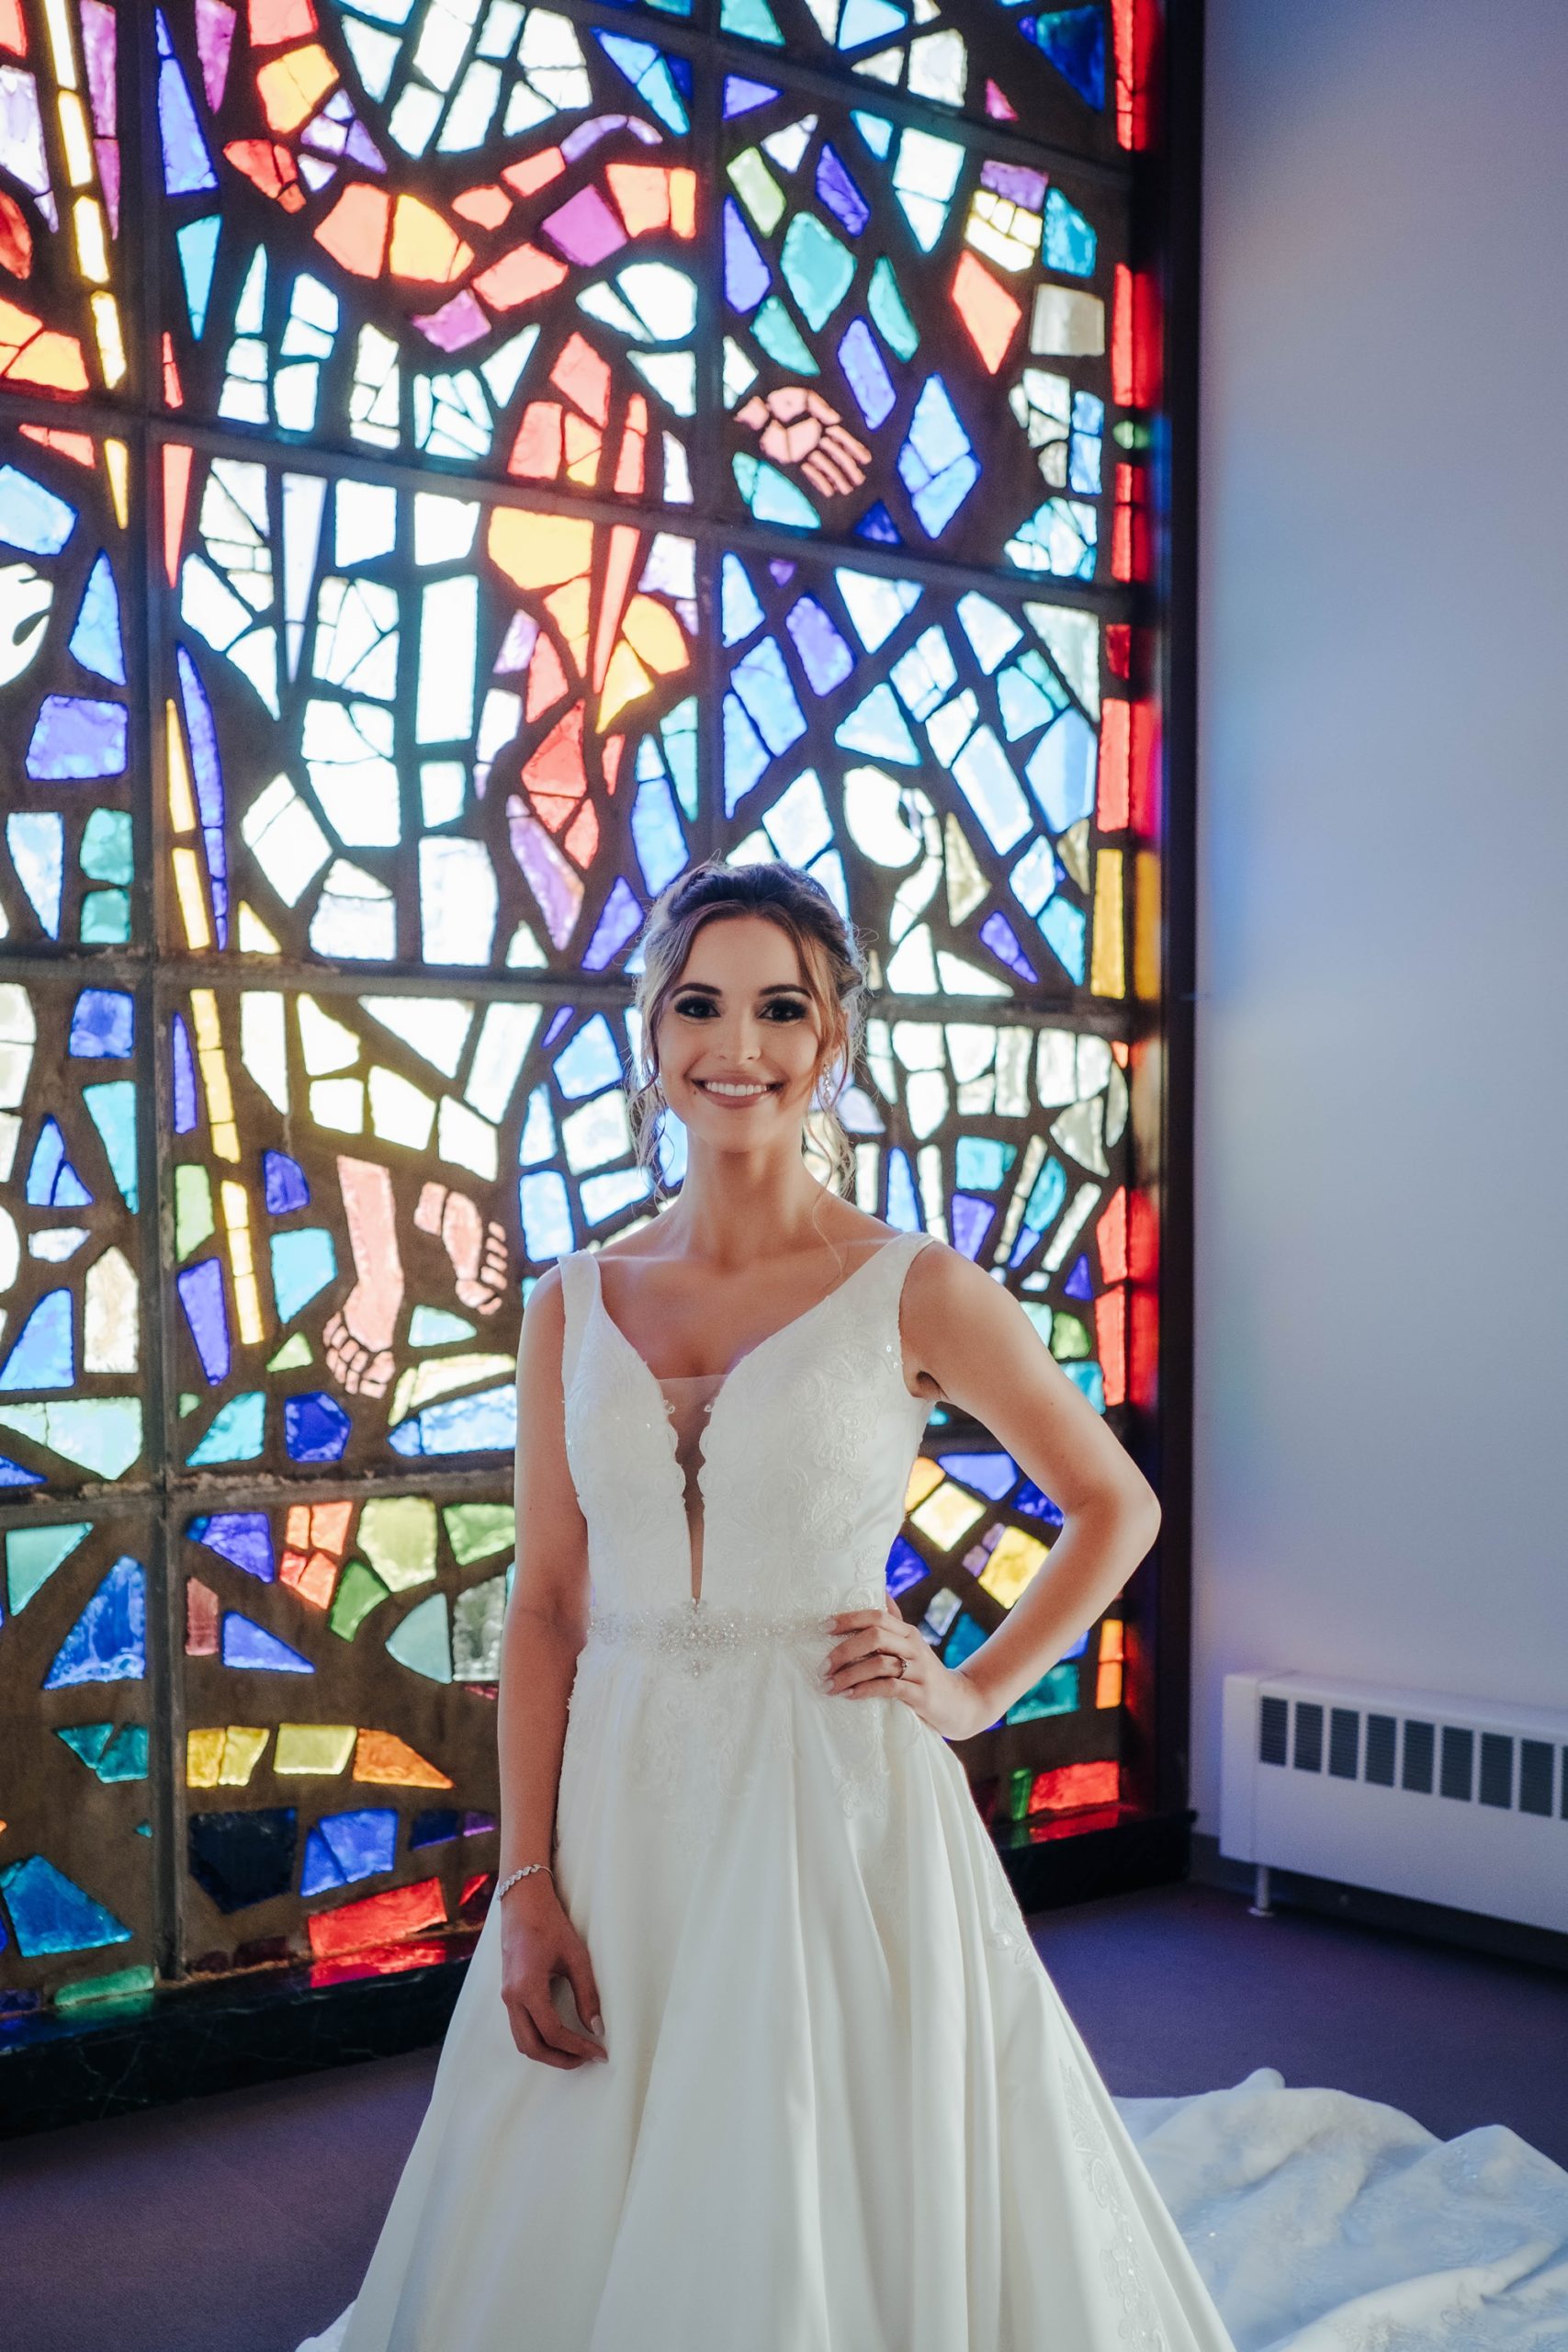 bride poses with hands on her hips in front of stained glass window in Ohio church